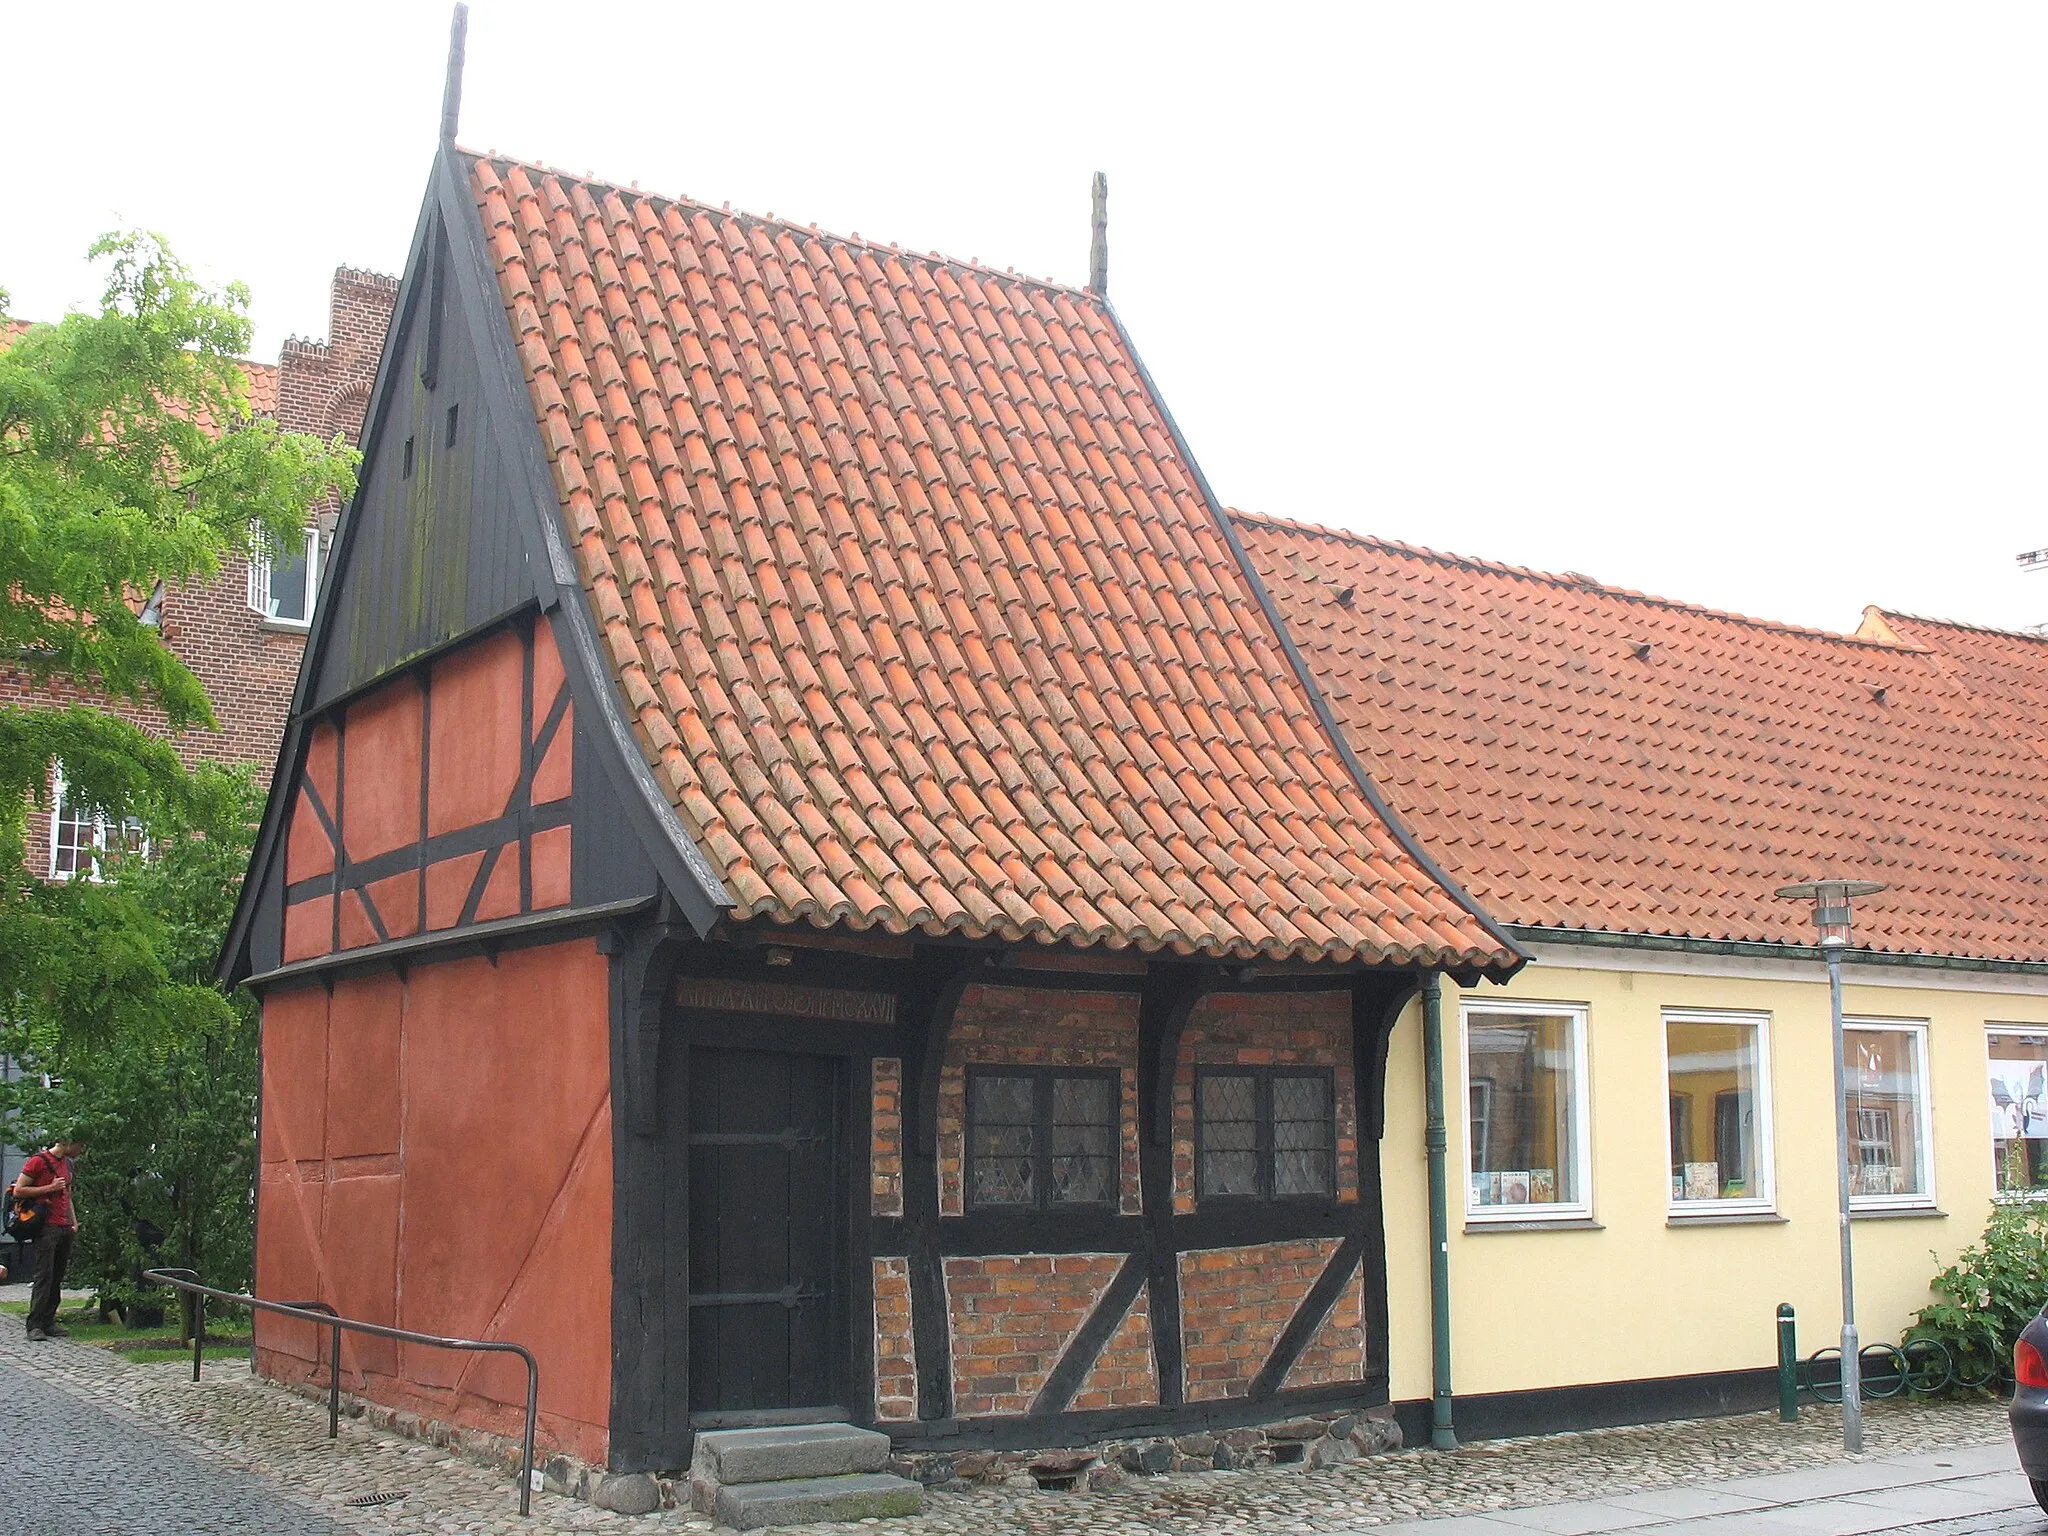 Photo showing: Oldest dated Danish half-timbered house in the town "Køge". The town is located in Middle Zealand in east Denmark.